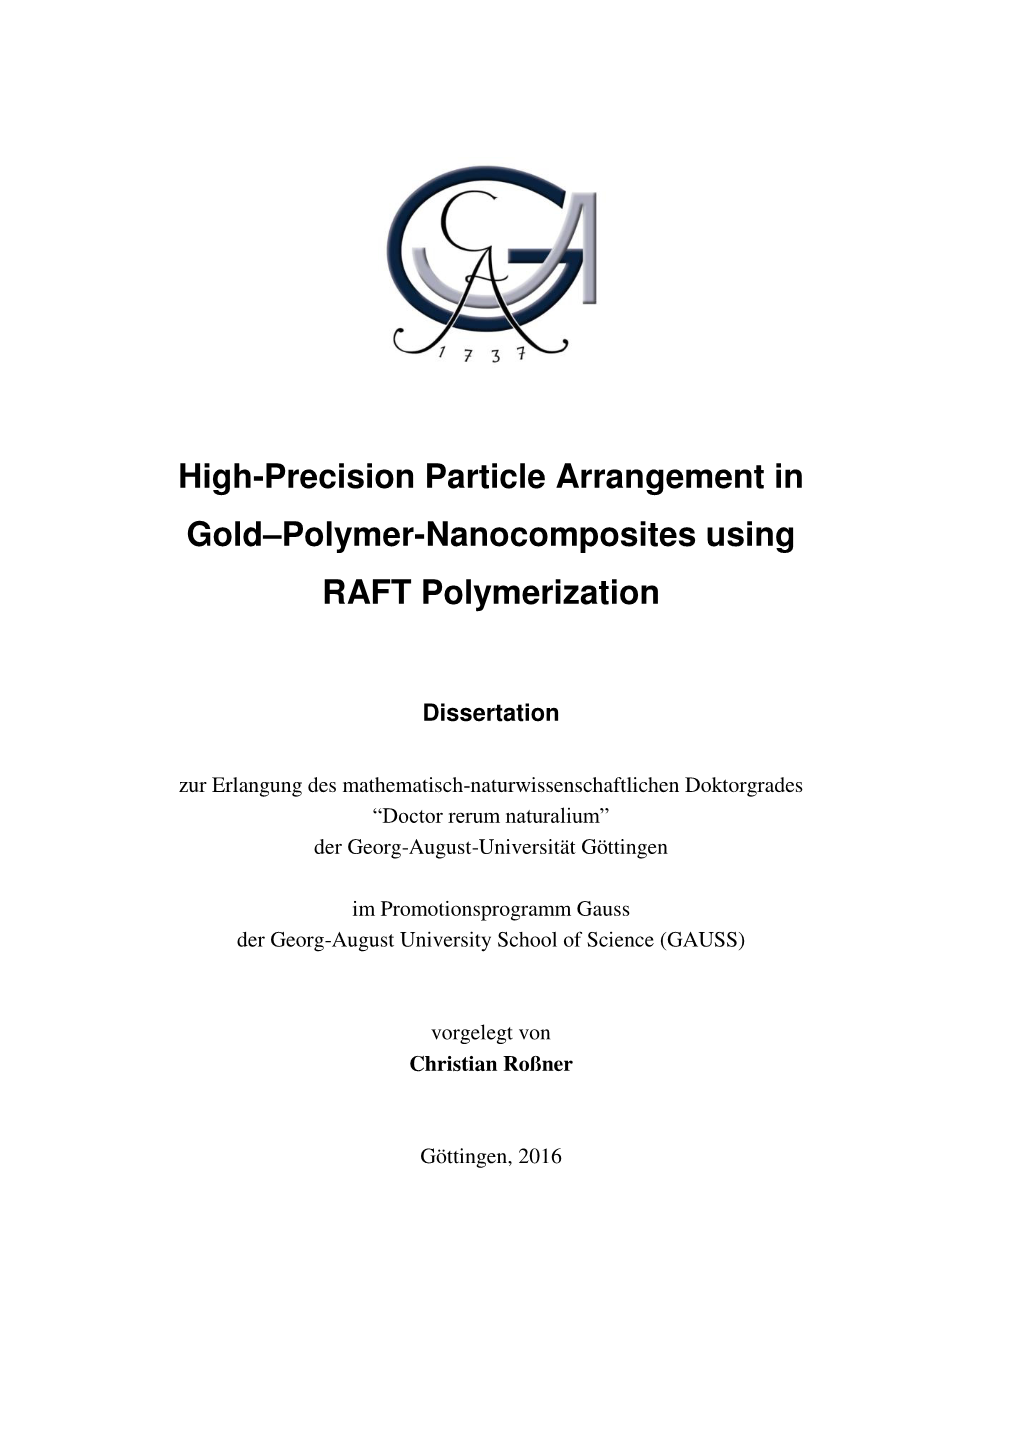 High-Precision Particle Arrangement in Gold‒Polymer-Nanocomposites Using RAFT Polymerization